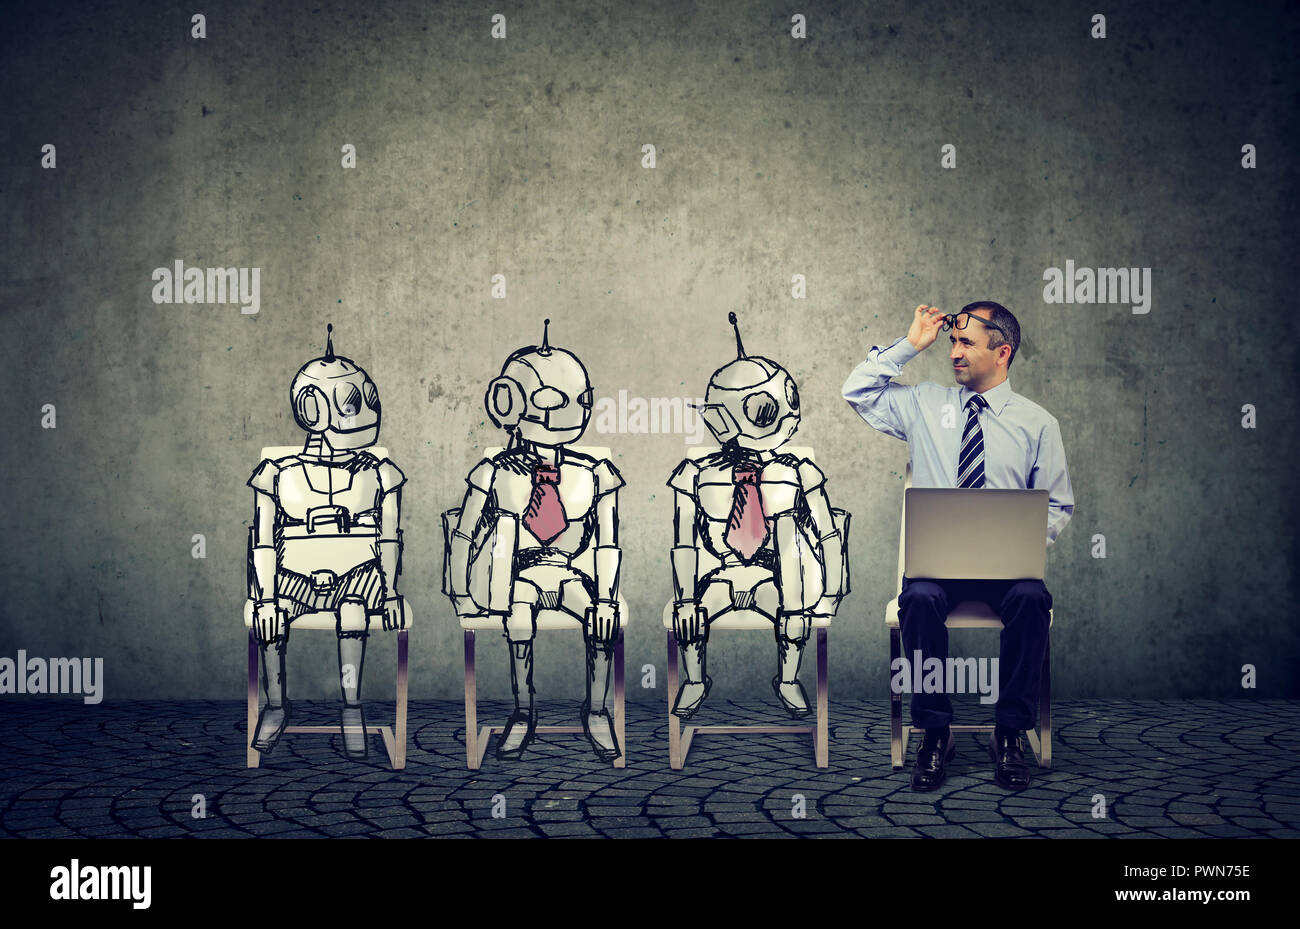 Human vs artificial intelligence concept. Business job applicant man competing with cartoon robots sitting in line for a job interview Stock Photo